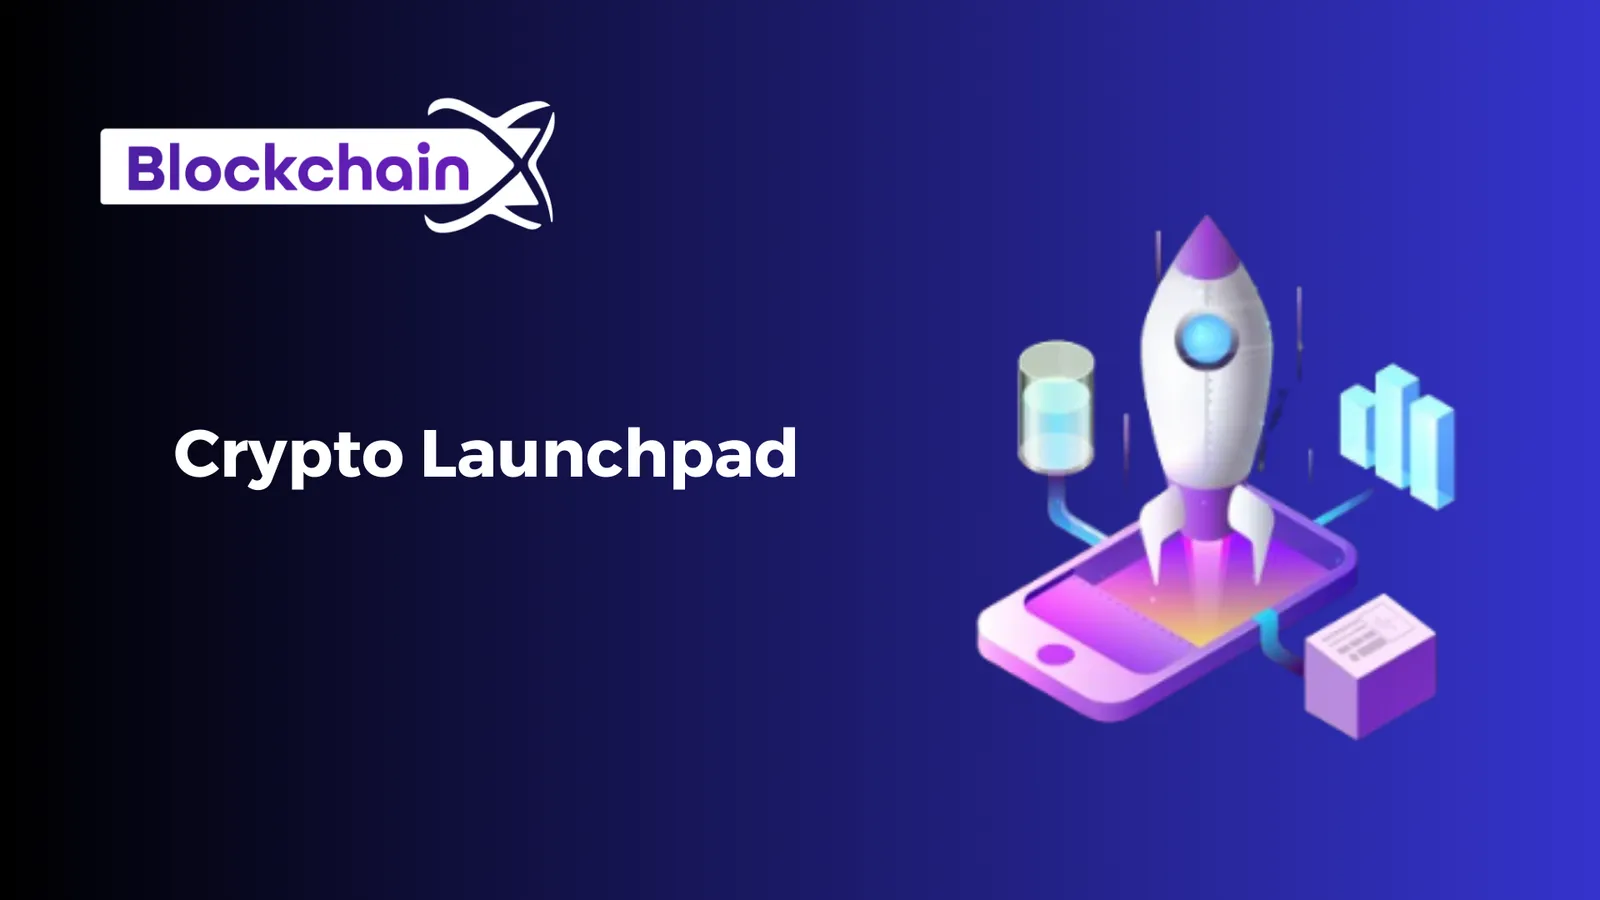 How do I know if a Crypto Launchpad is reliable one?